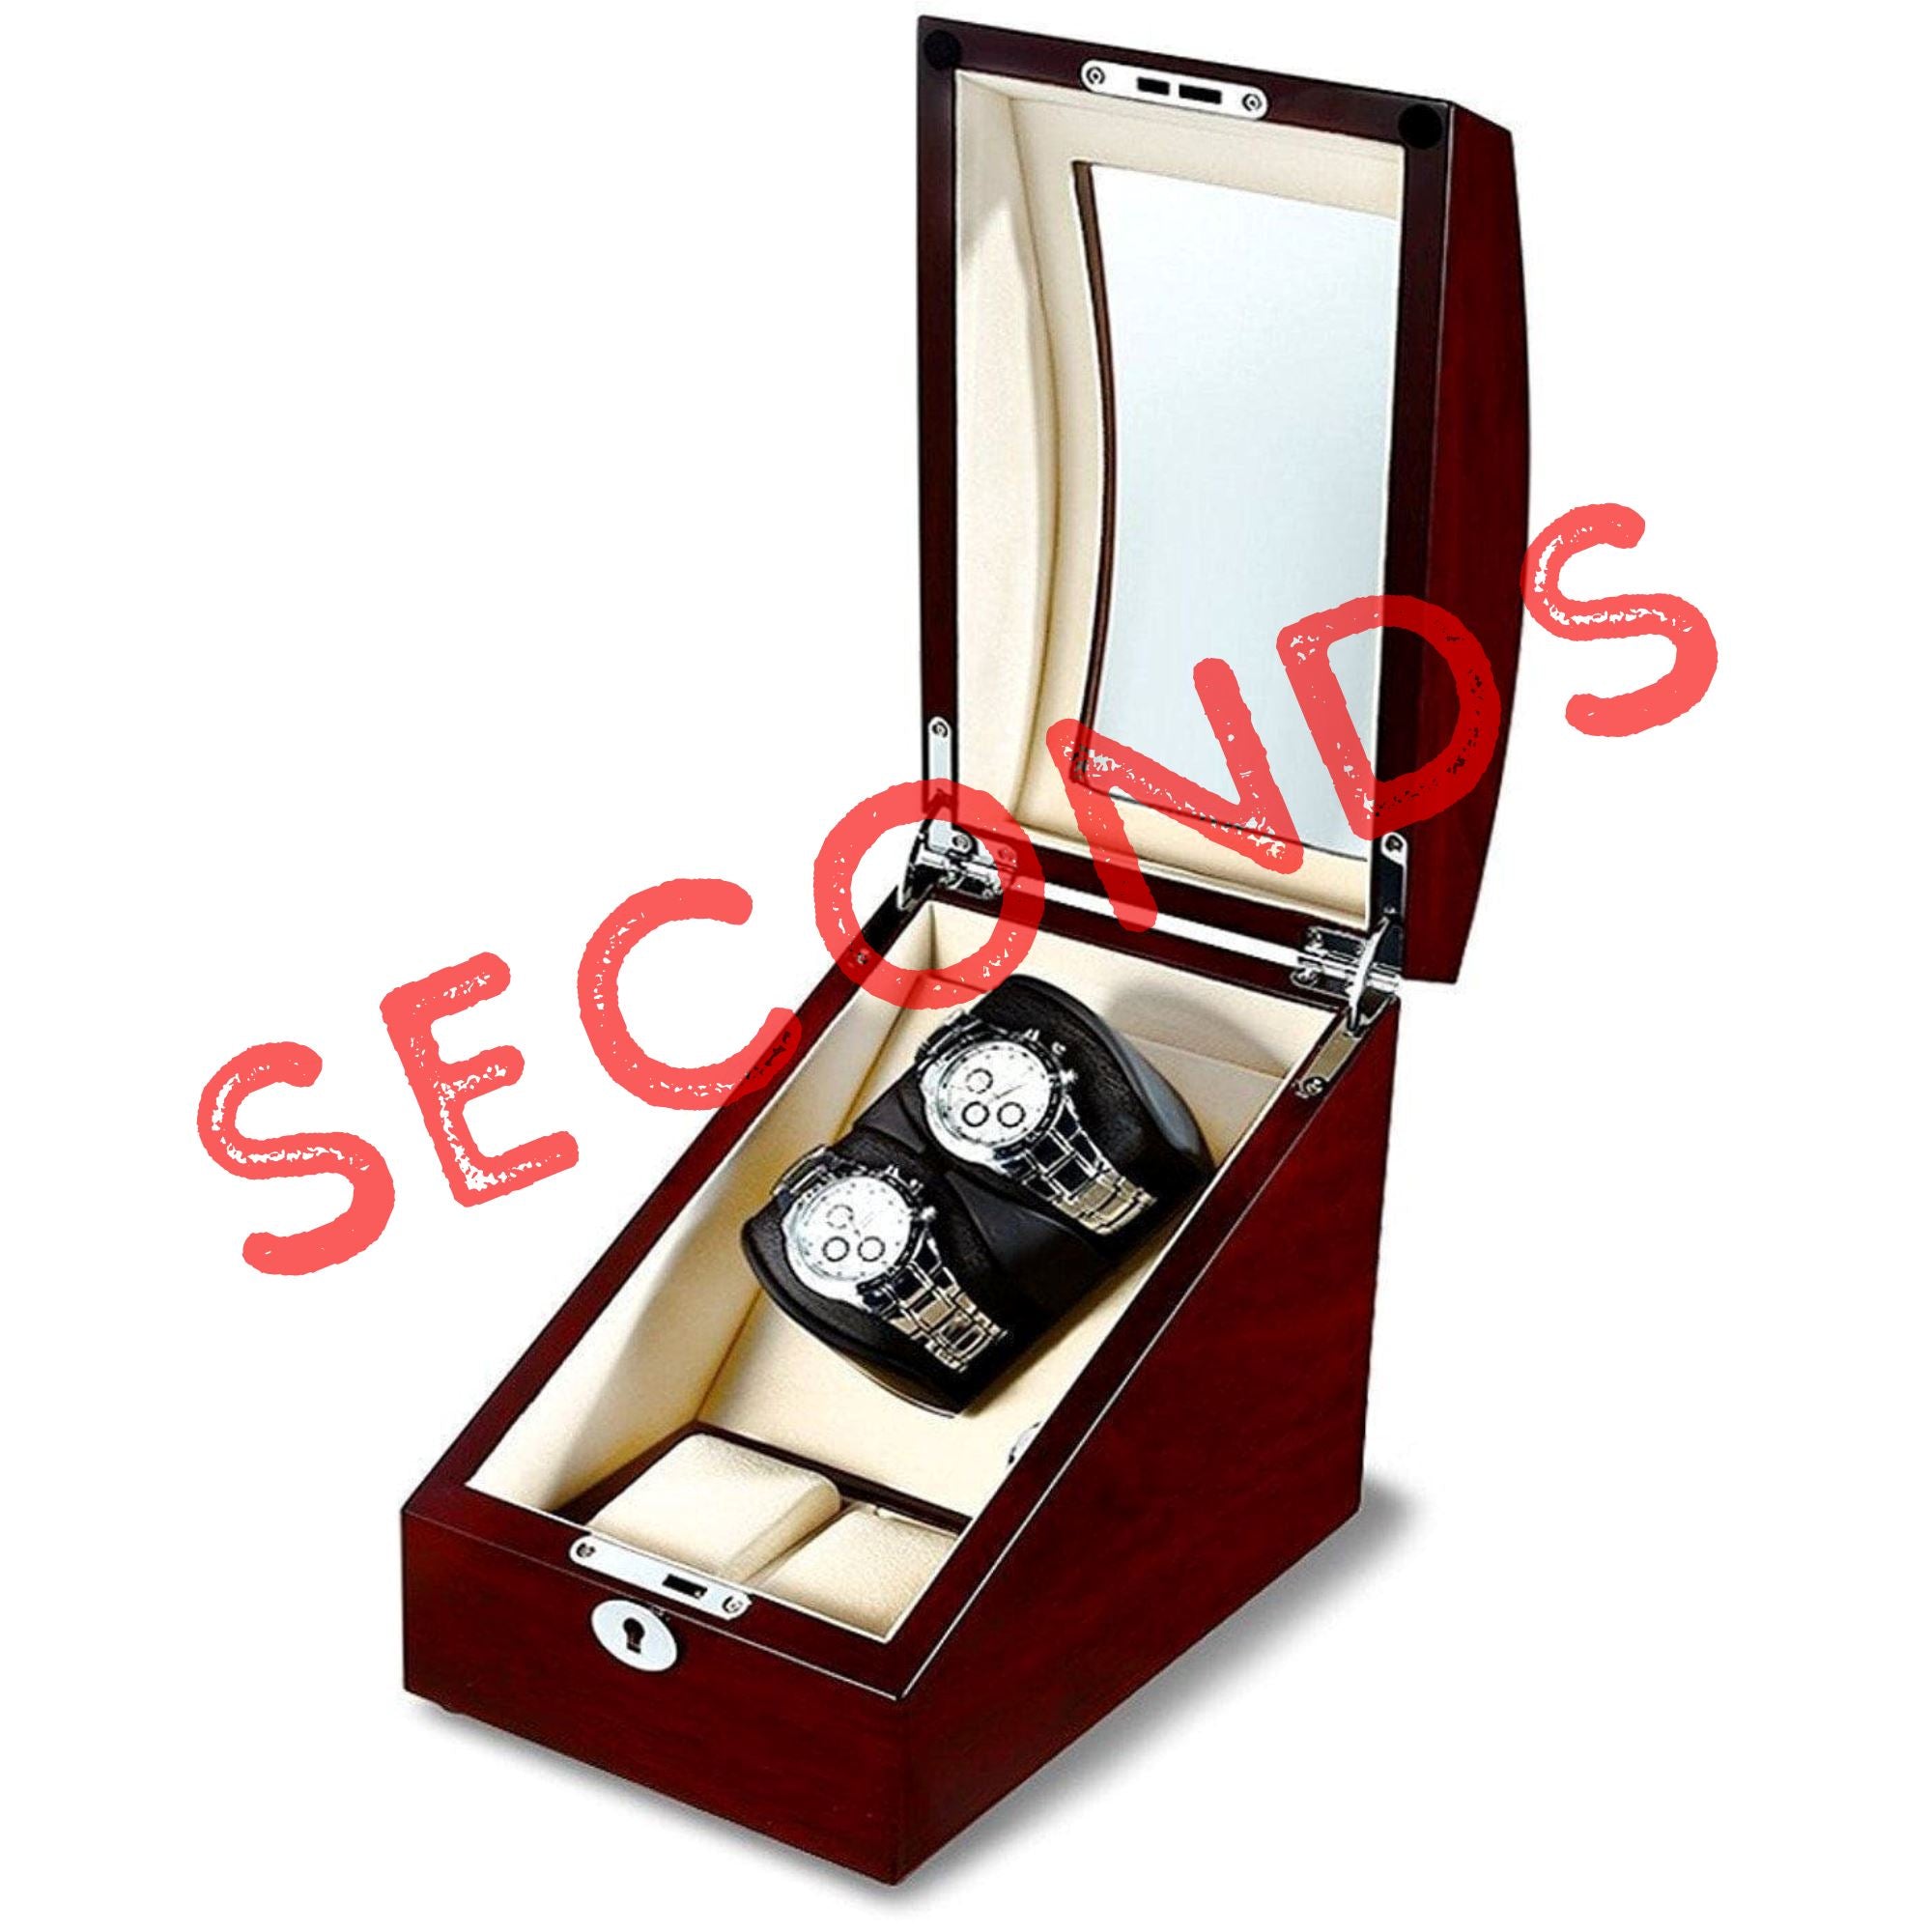 Seconds - Avoca Watch Winder Box for 2 + 2 Watches in Mahogany (c) Seconds Clinks 